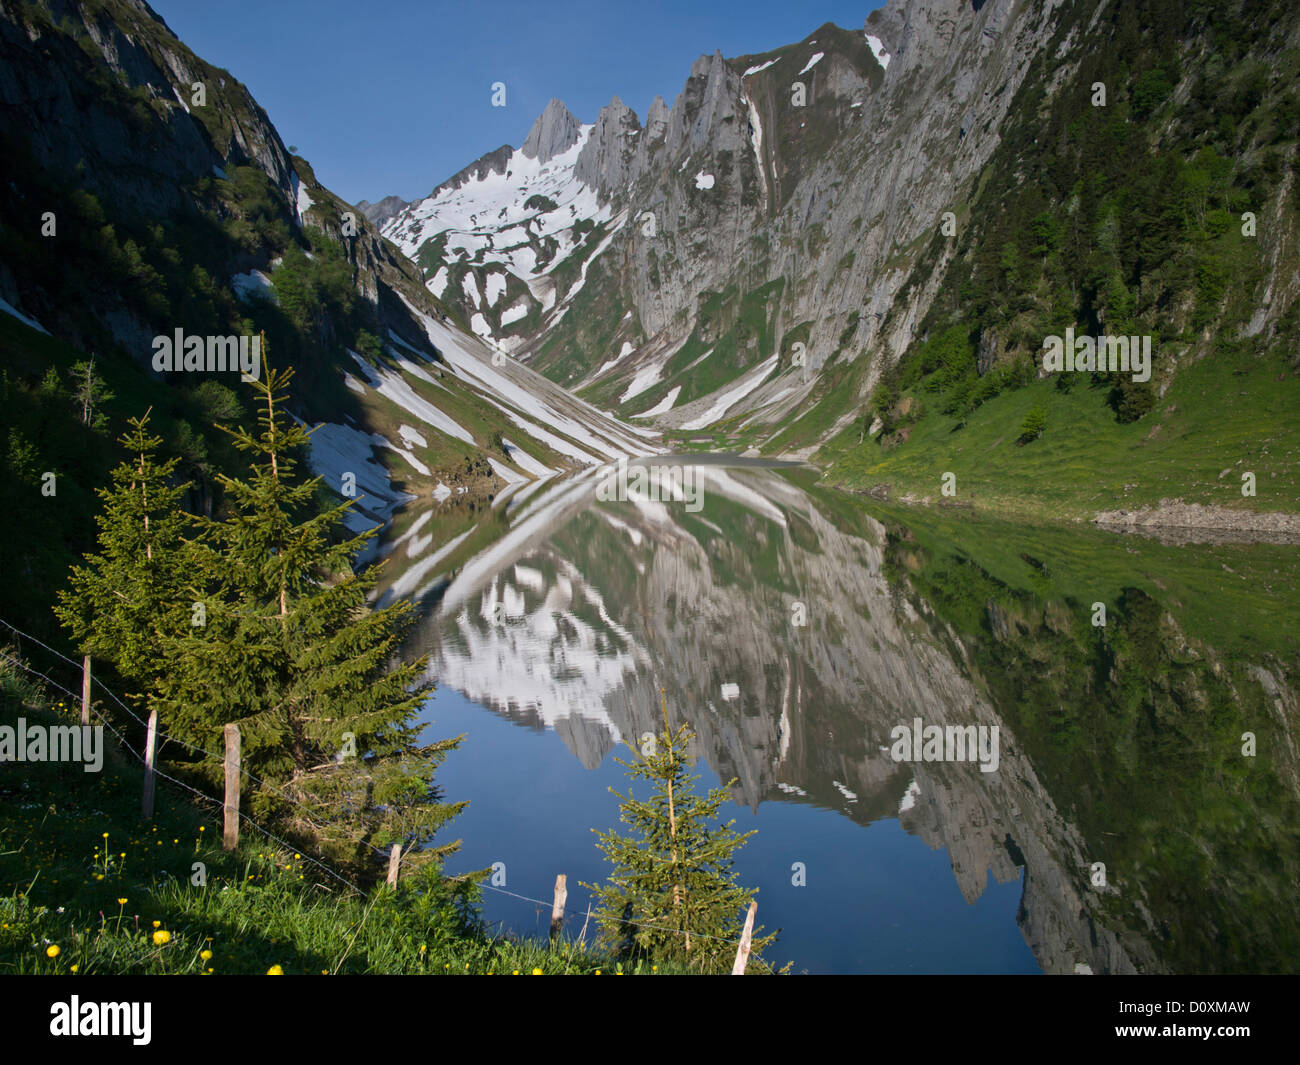 Alps, Alpstein, tree, trees, conifers, precipitous, canton, IR, Appenzell, Innerrhoden, rock, cliff, Fälensee, mountain chain, A Stock Photo